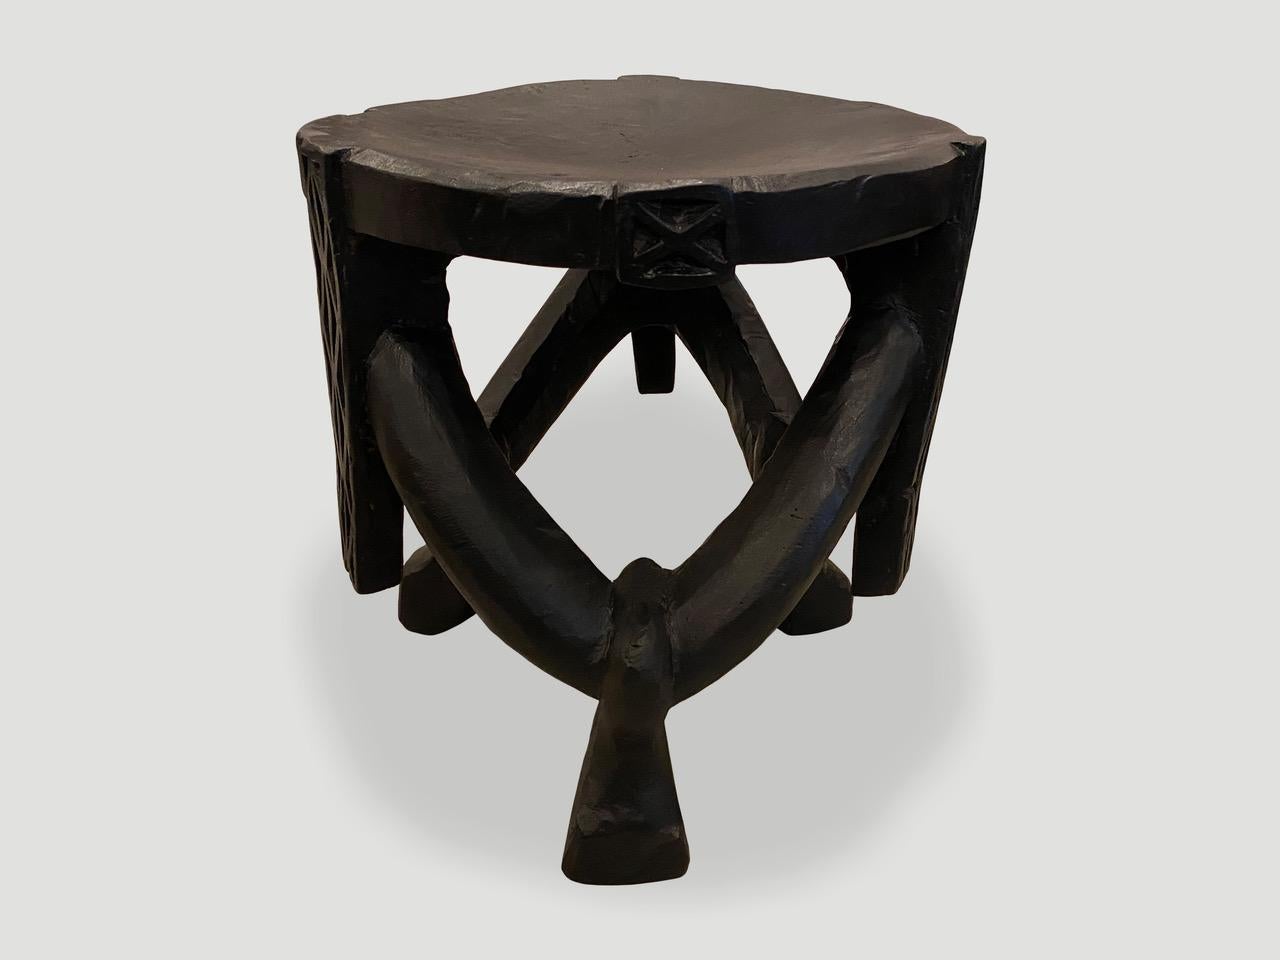 Tribal Andrianna Shamaris Tanzanian Antique Sculptural Side Table or Stool